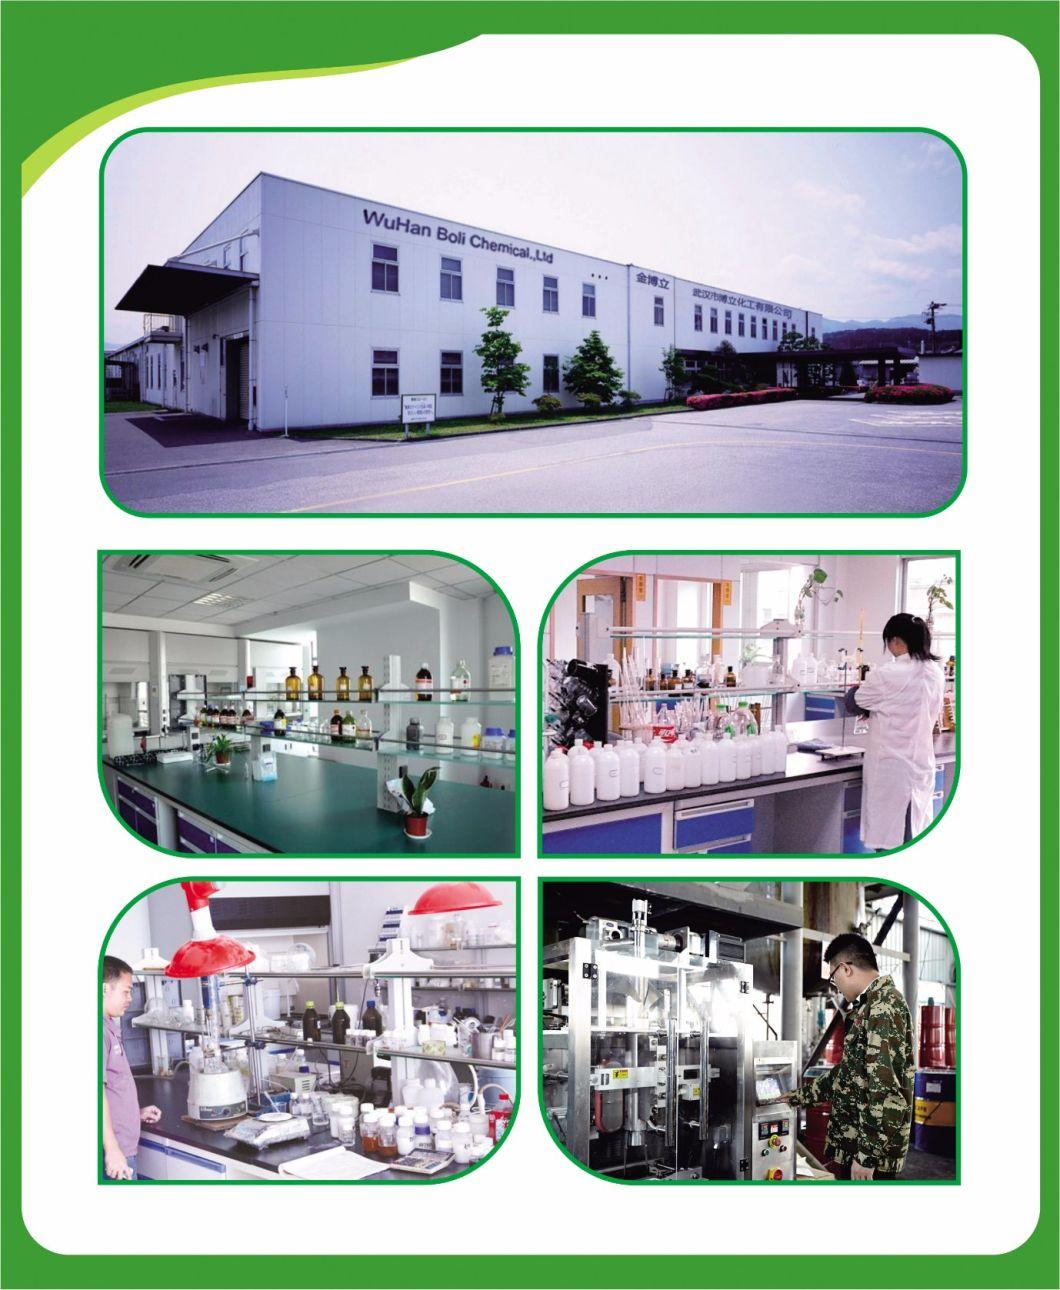 GBL China Manufacture Best Price High Quality Sbs Spray Adhesive